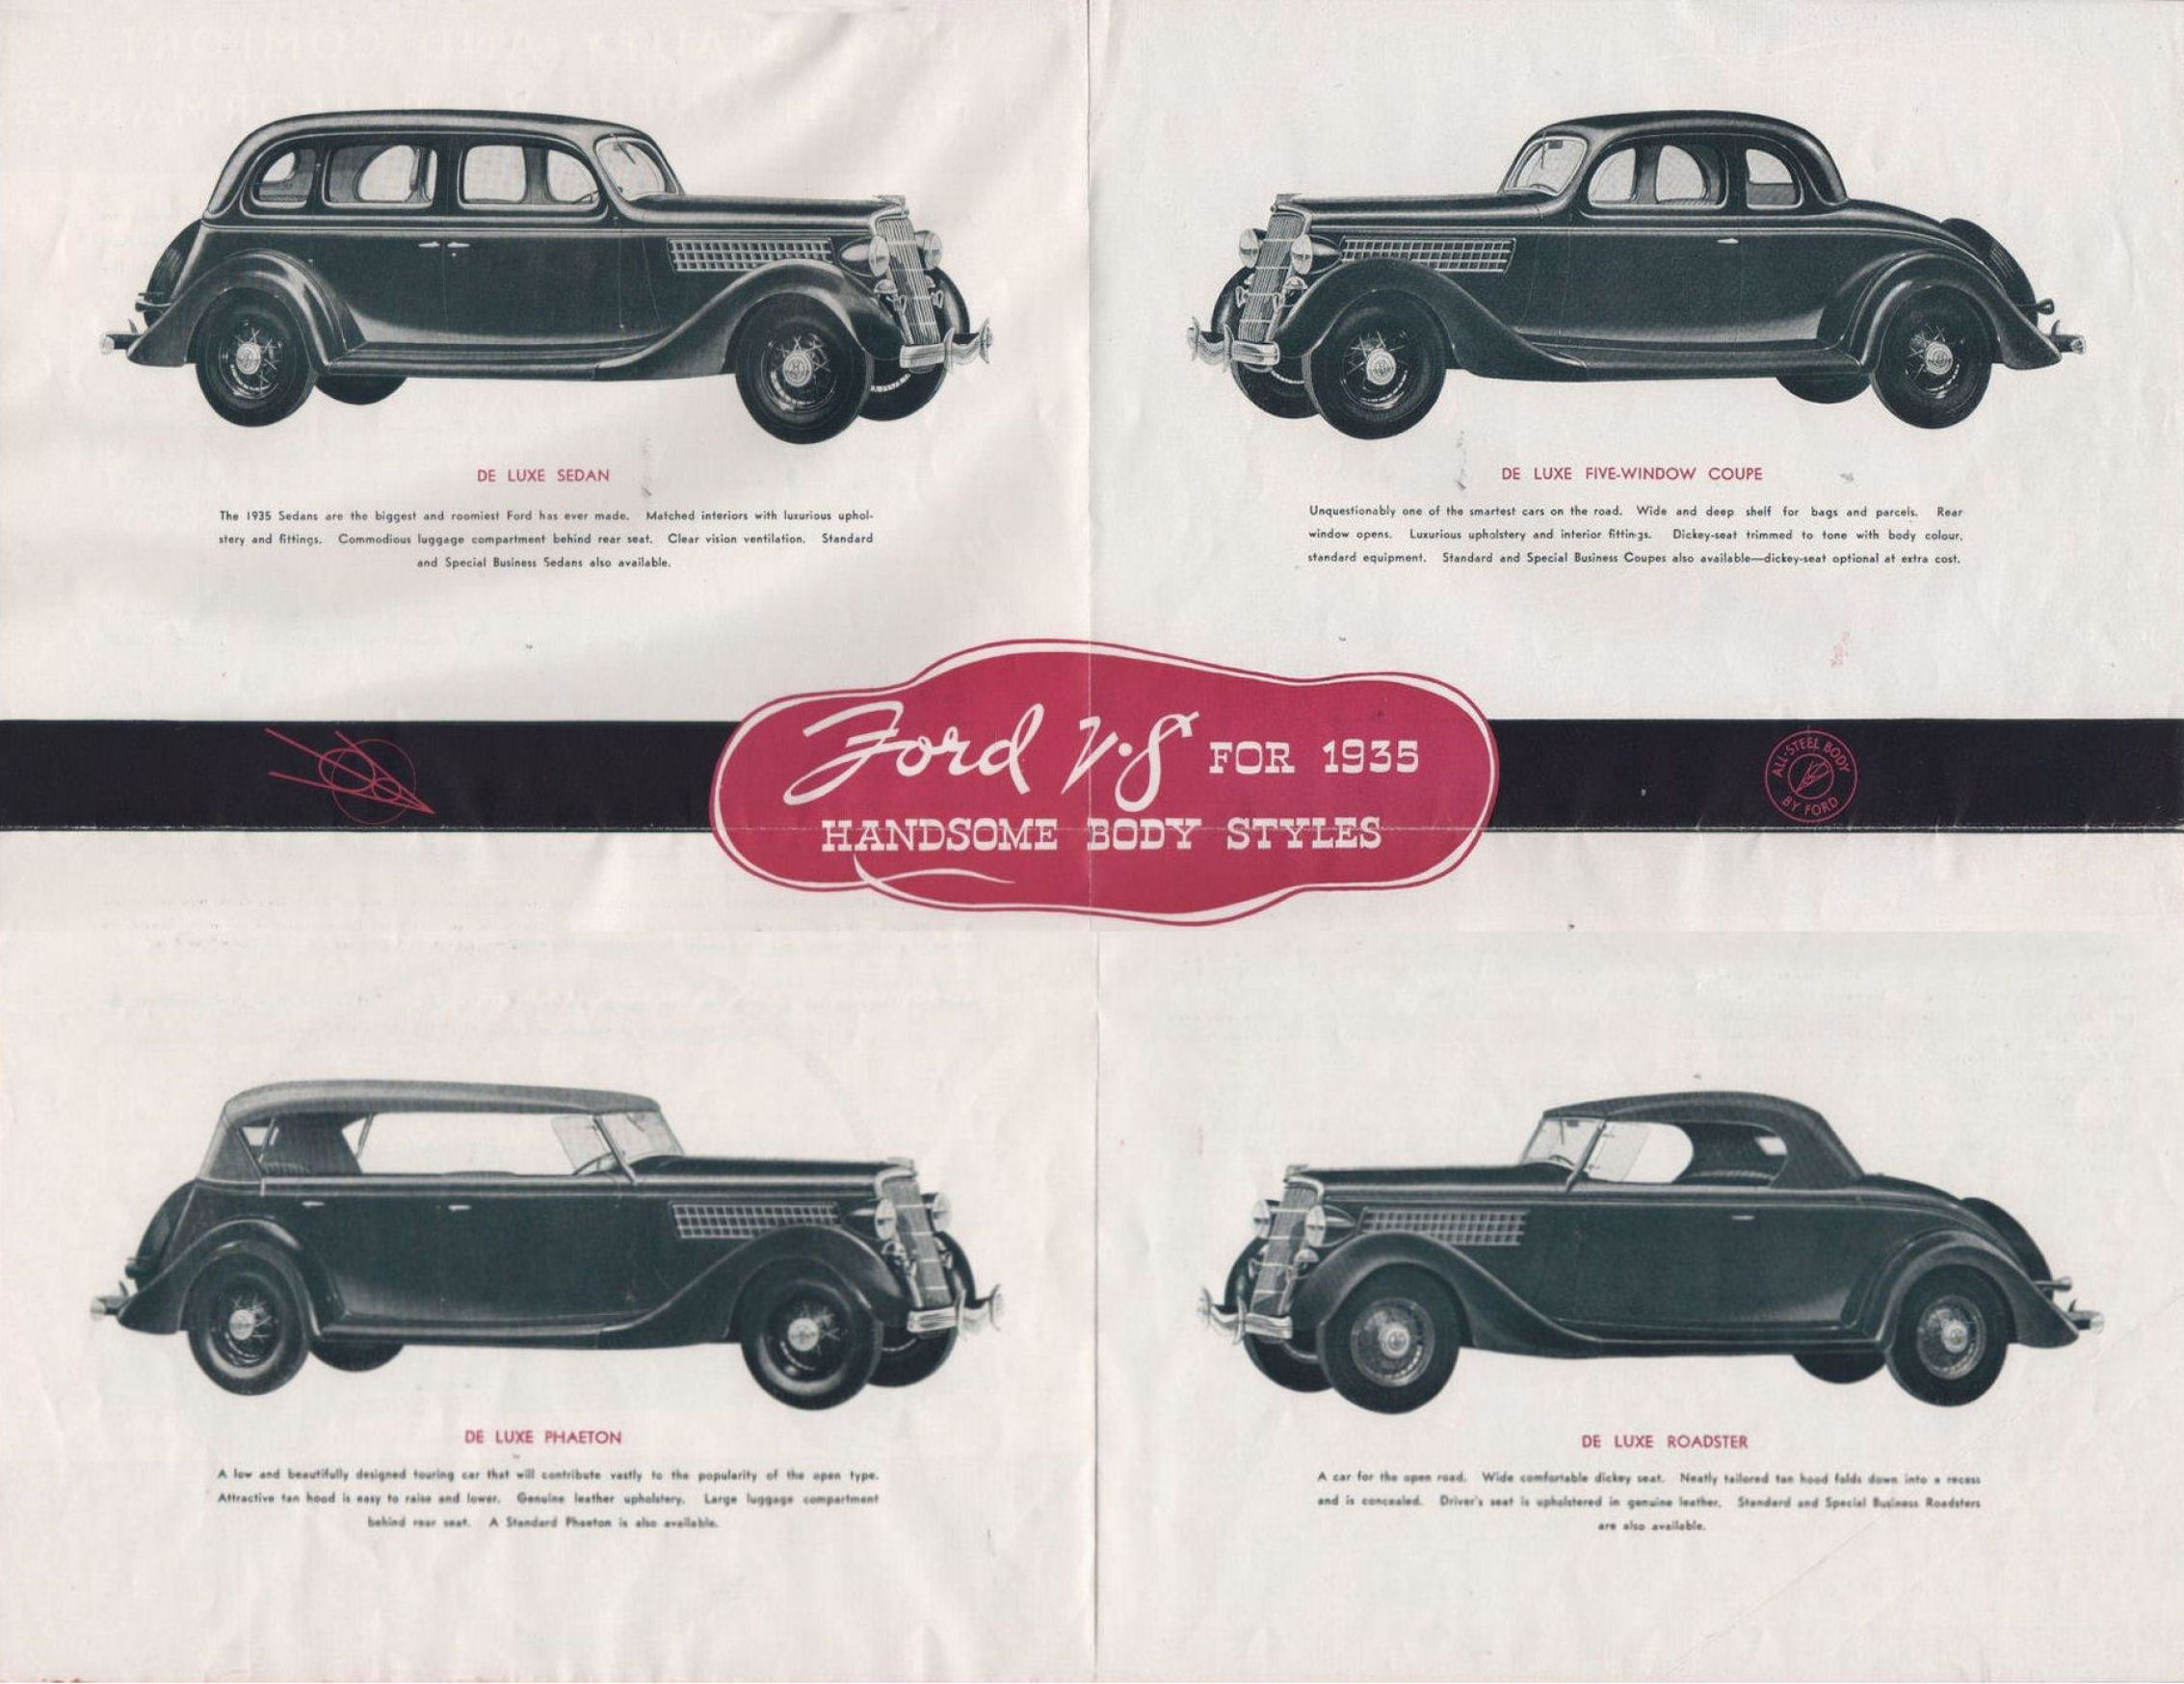 1935_Ford_Foldout-02